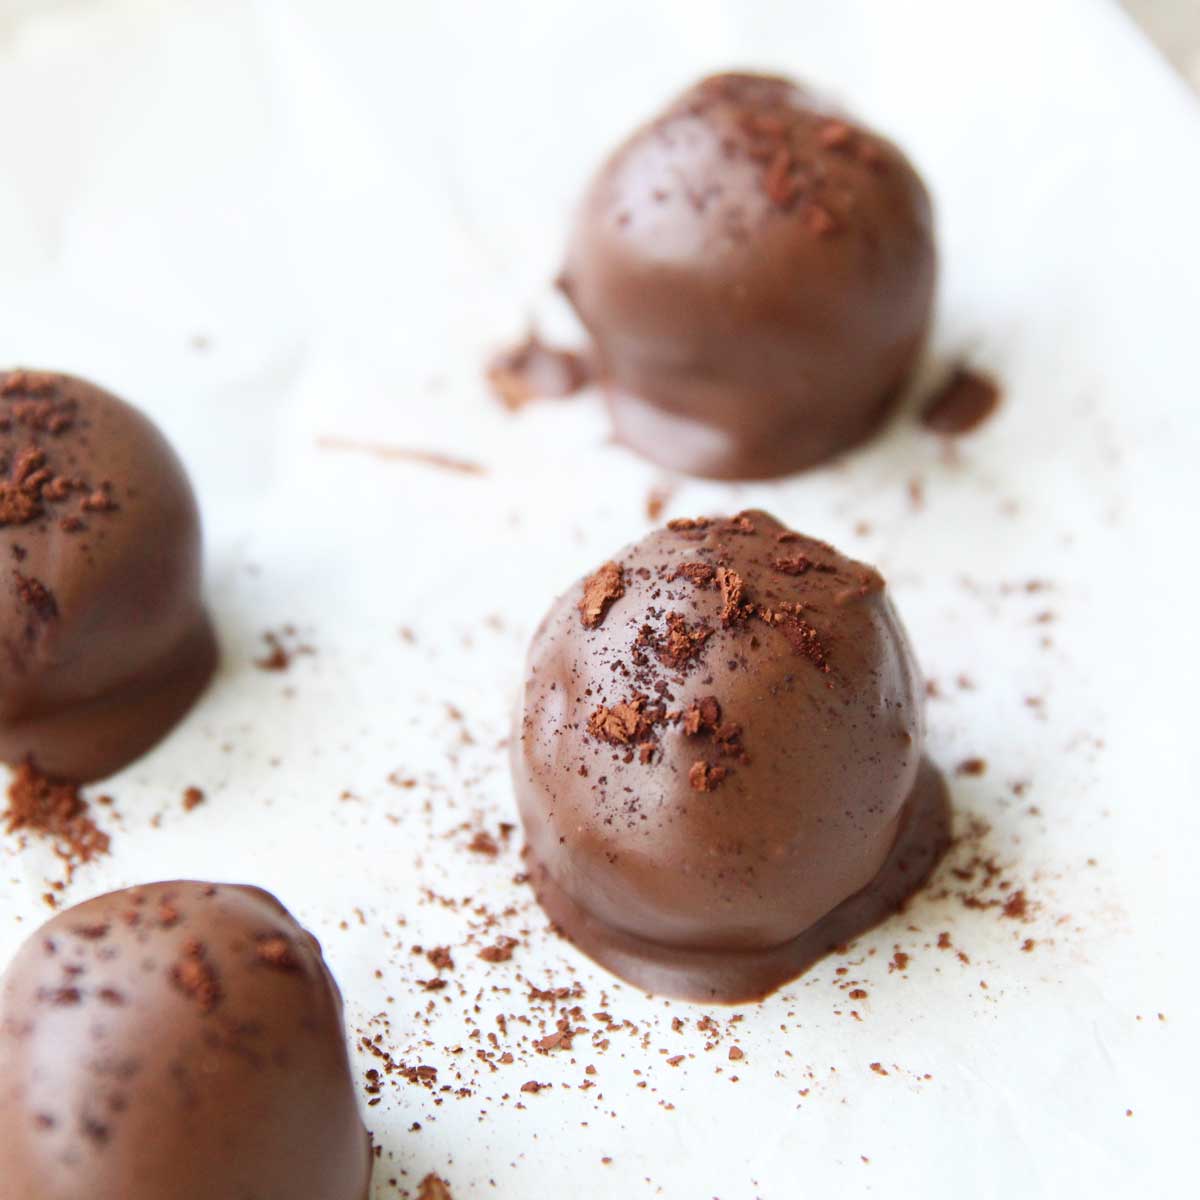 Let the chocolate on the Nutella protein balls set